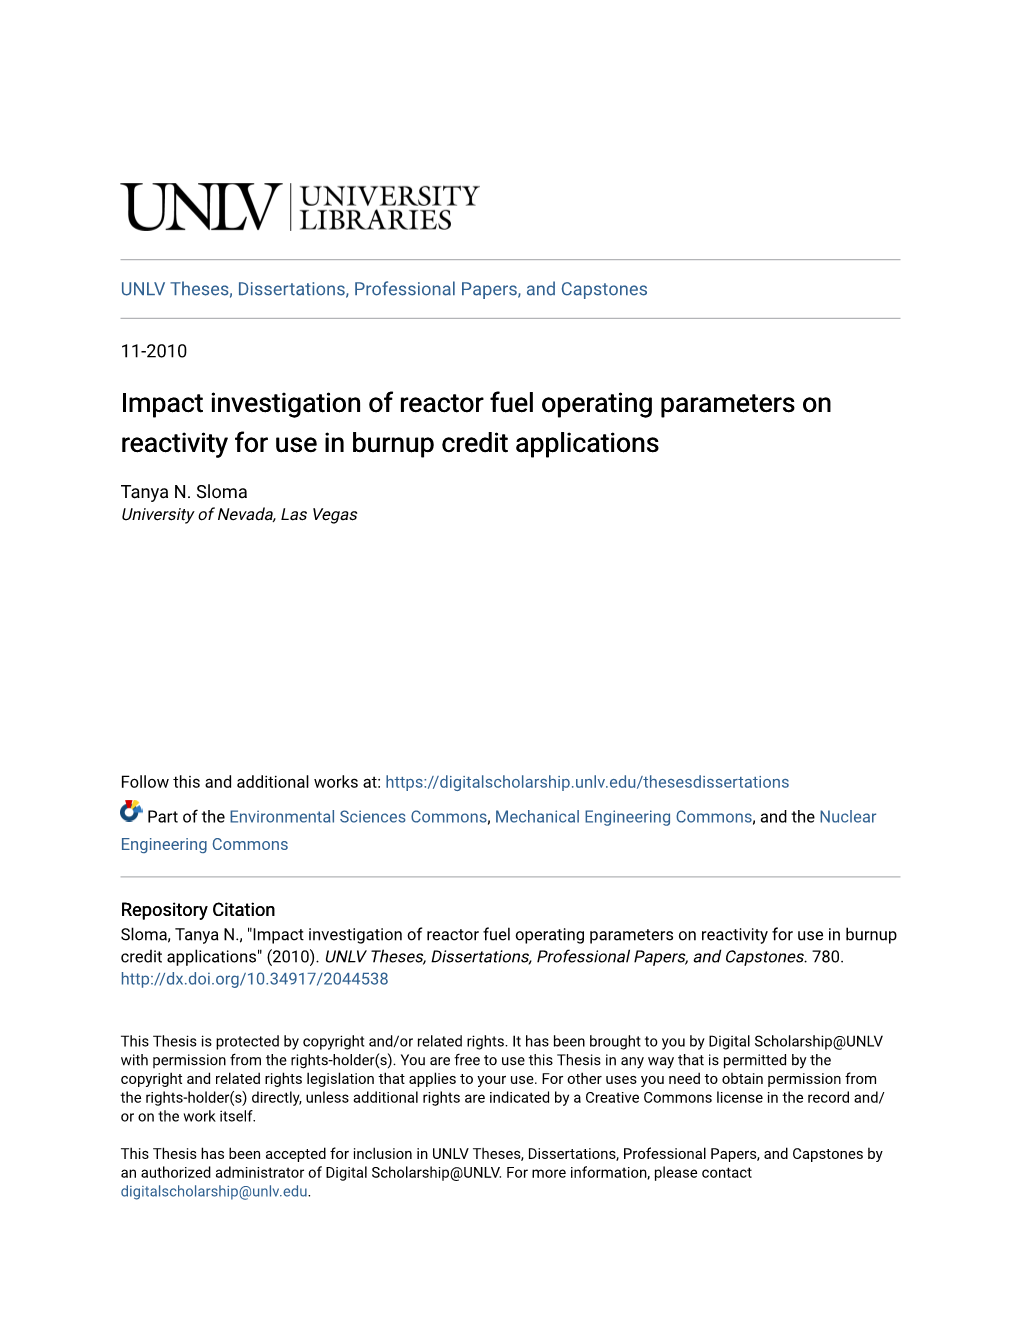 Impact Investigation of Reactor Fuel Operating Parameters on Reactivity for Use in Burnup Credit Applications